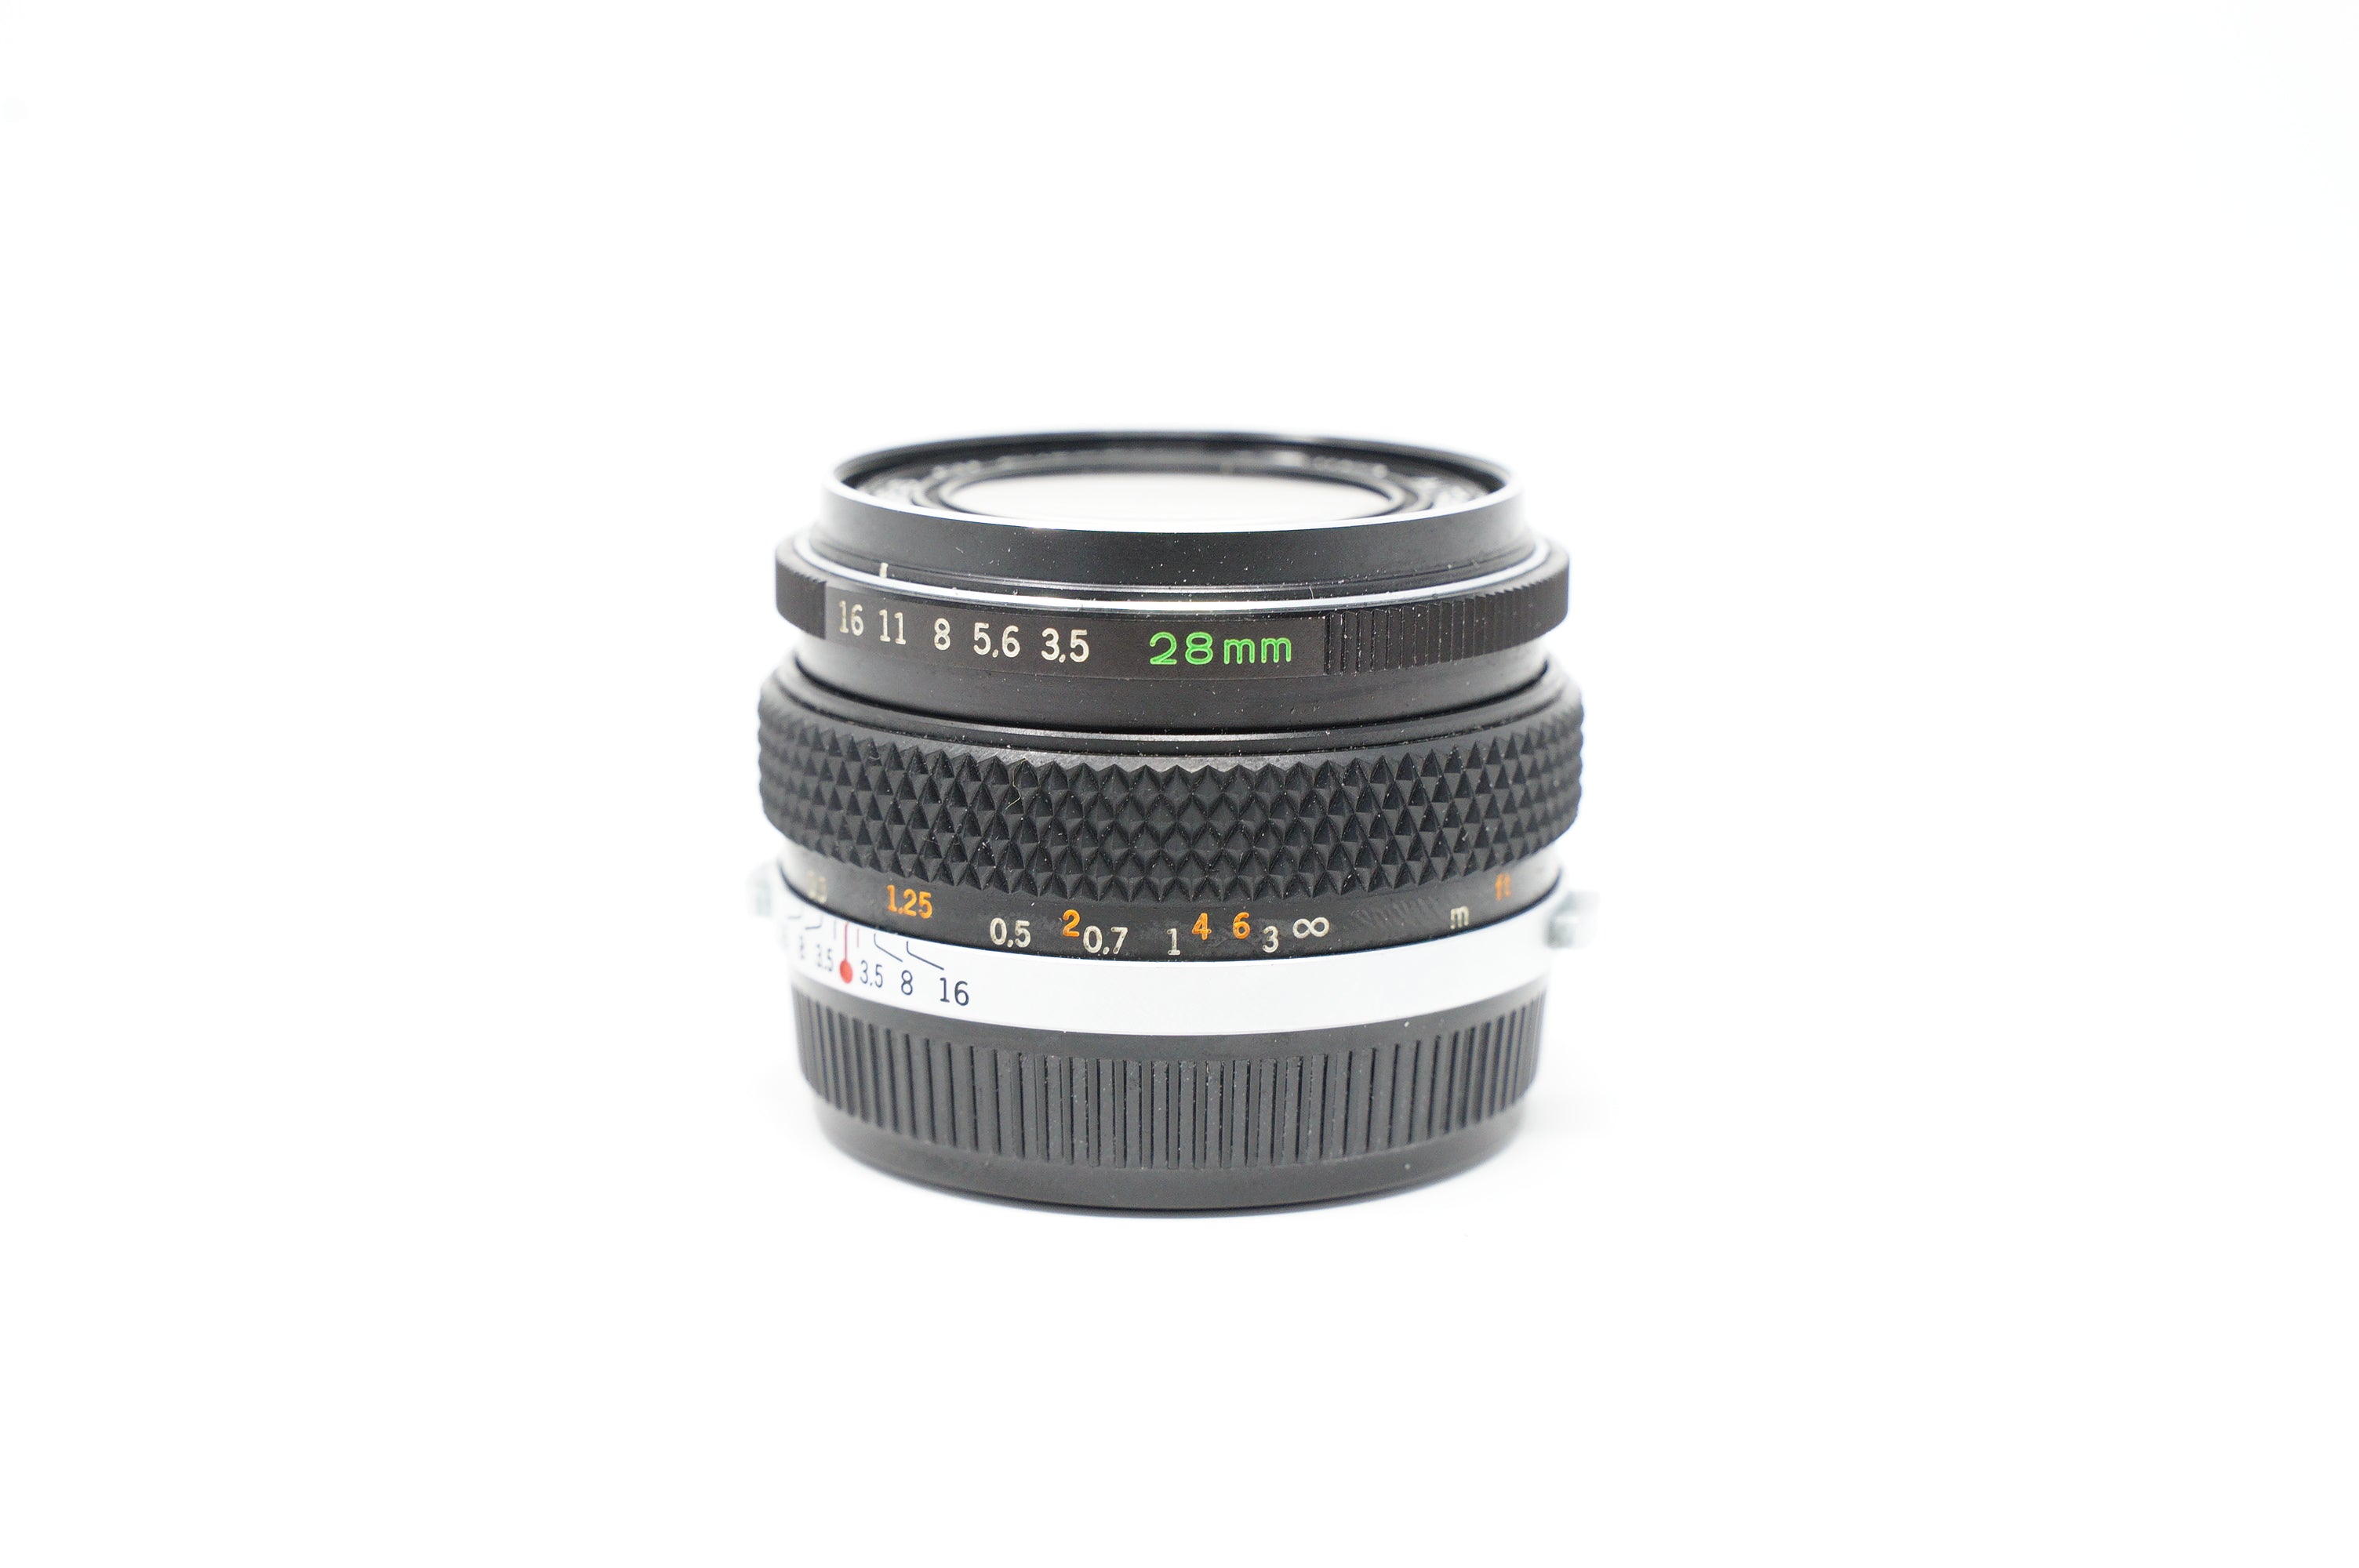 Product Image of Used Olympus Auto-W 28mm F3.5 wide angle lens for film cameras (Case SH37314)